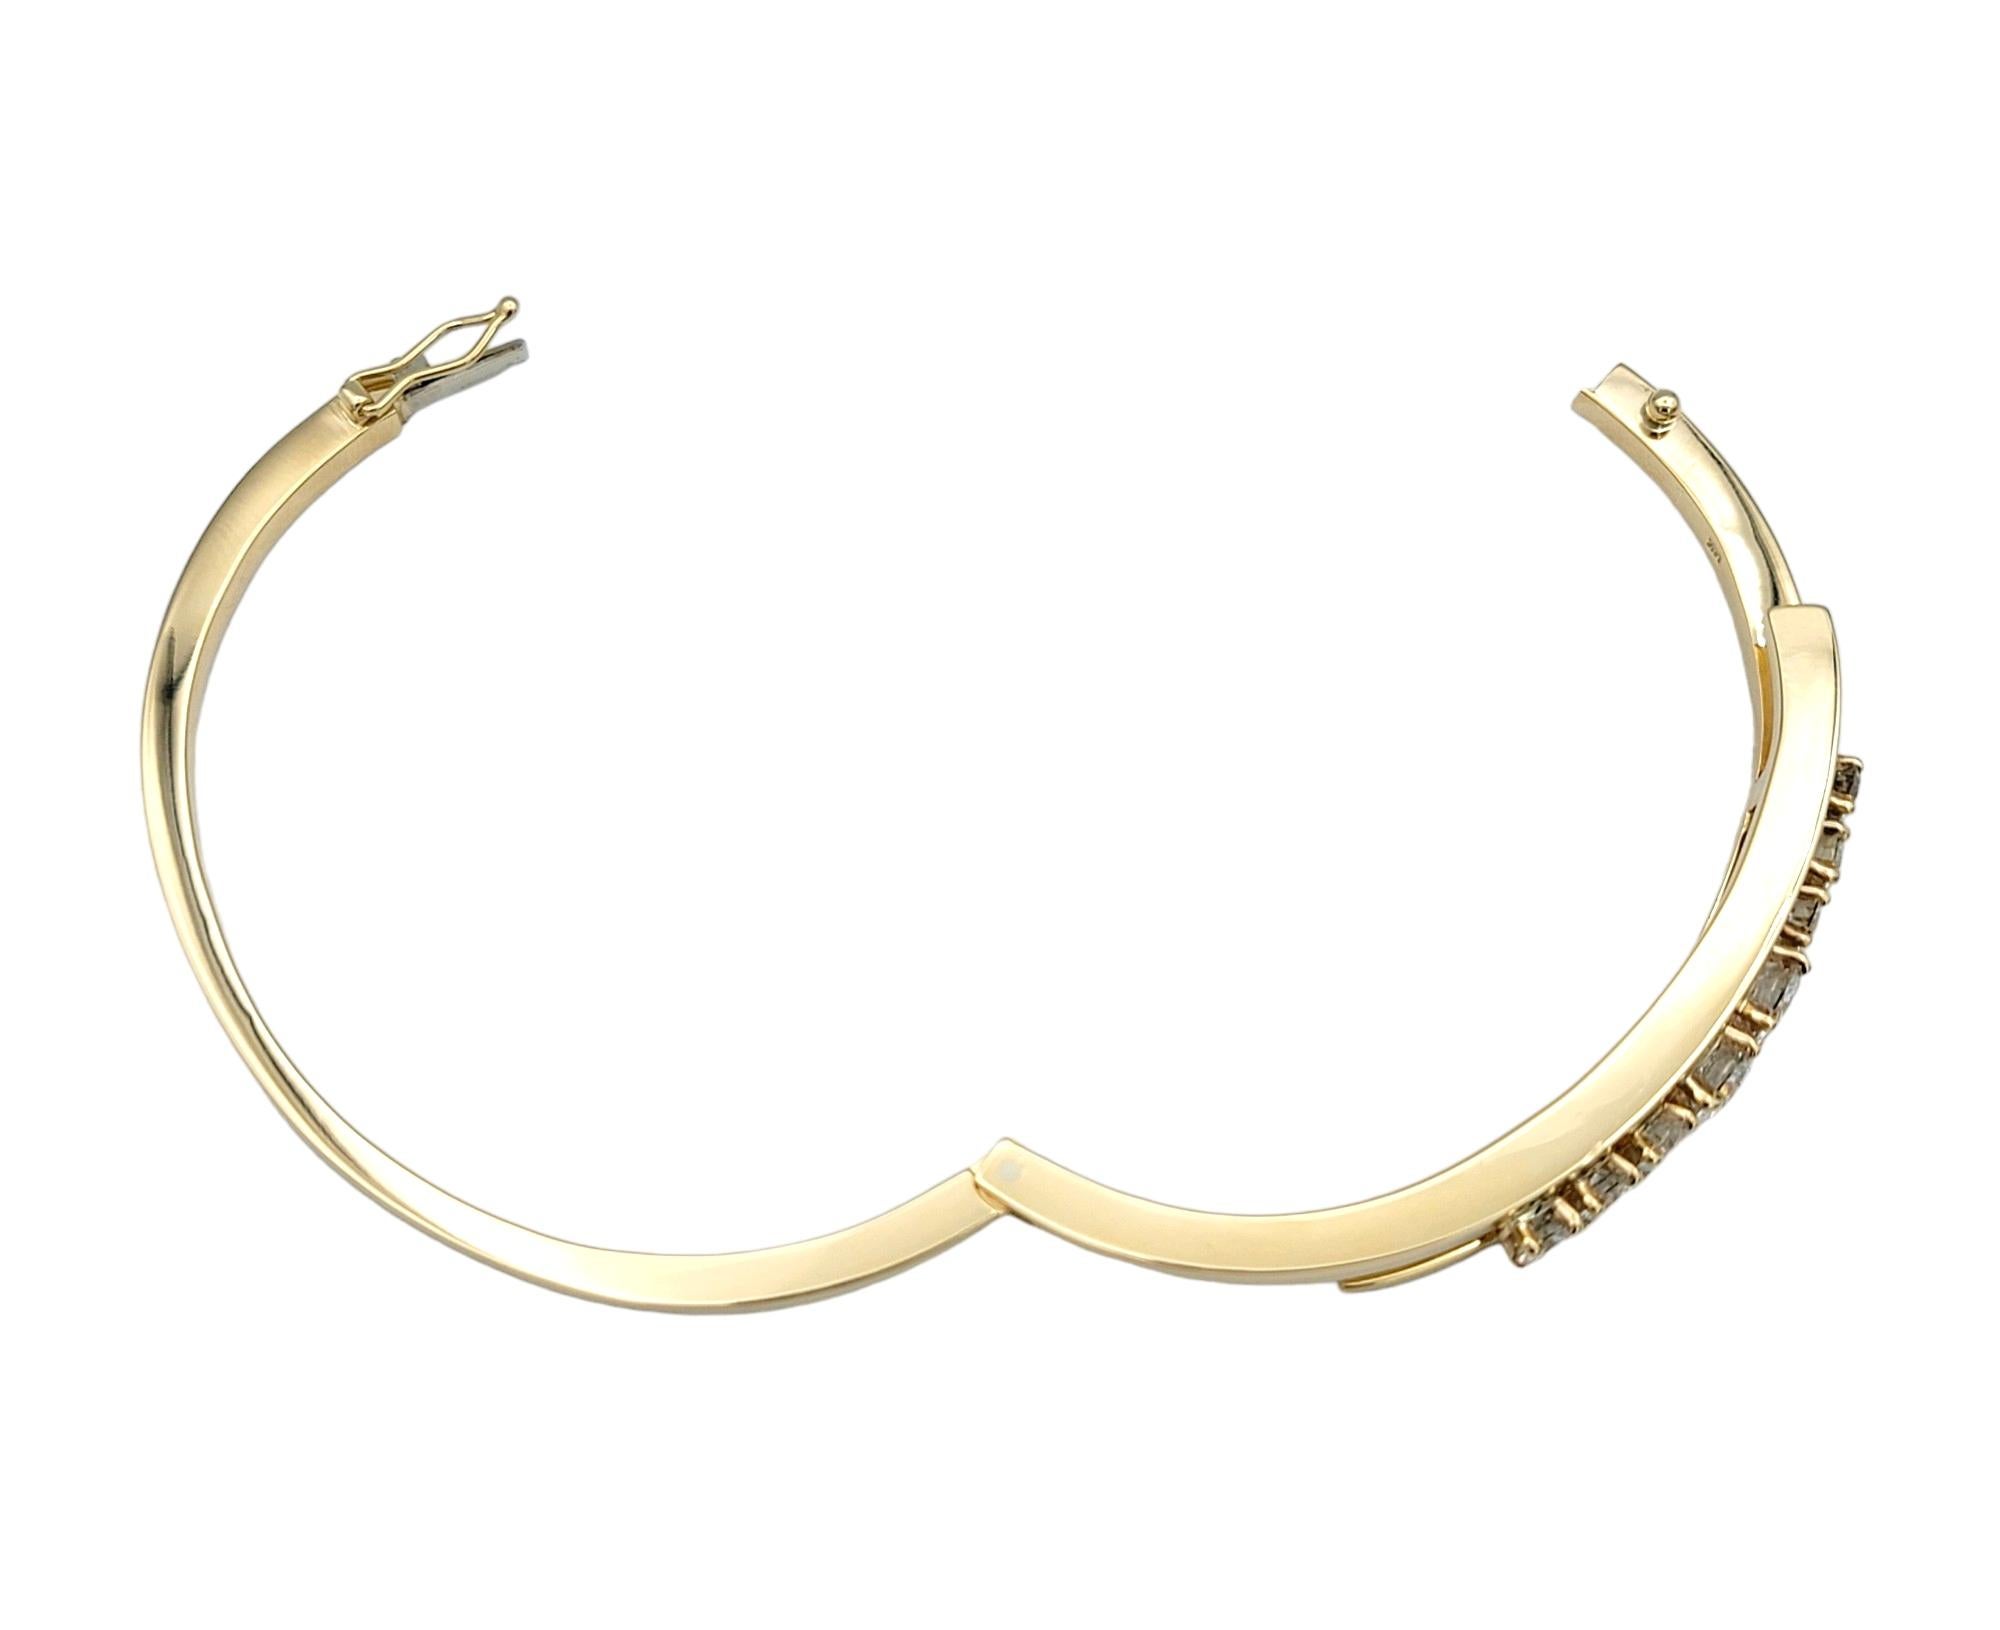 Round Diamond Bypass Style Hinged Bangle Bracelet Set in 14 Karat Yellow Gold In Good Condition For Sale In Scottsdale, AZ